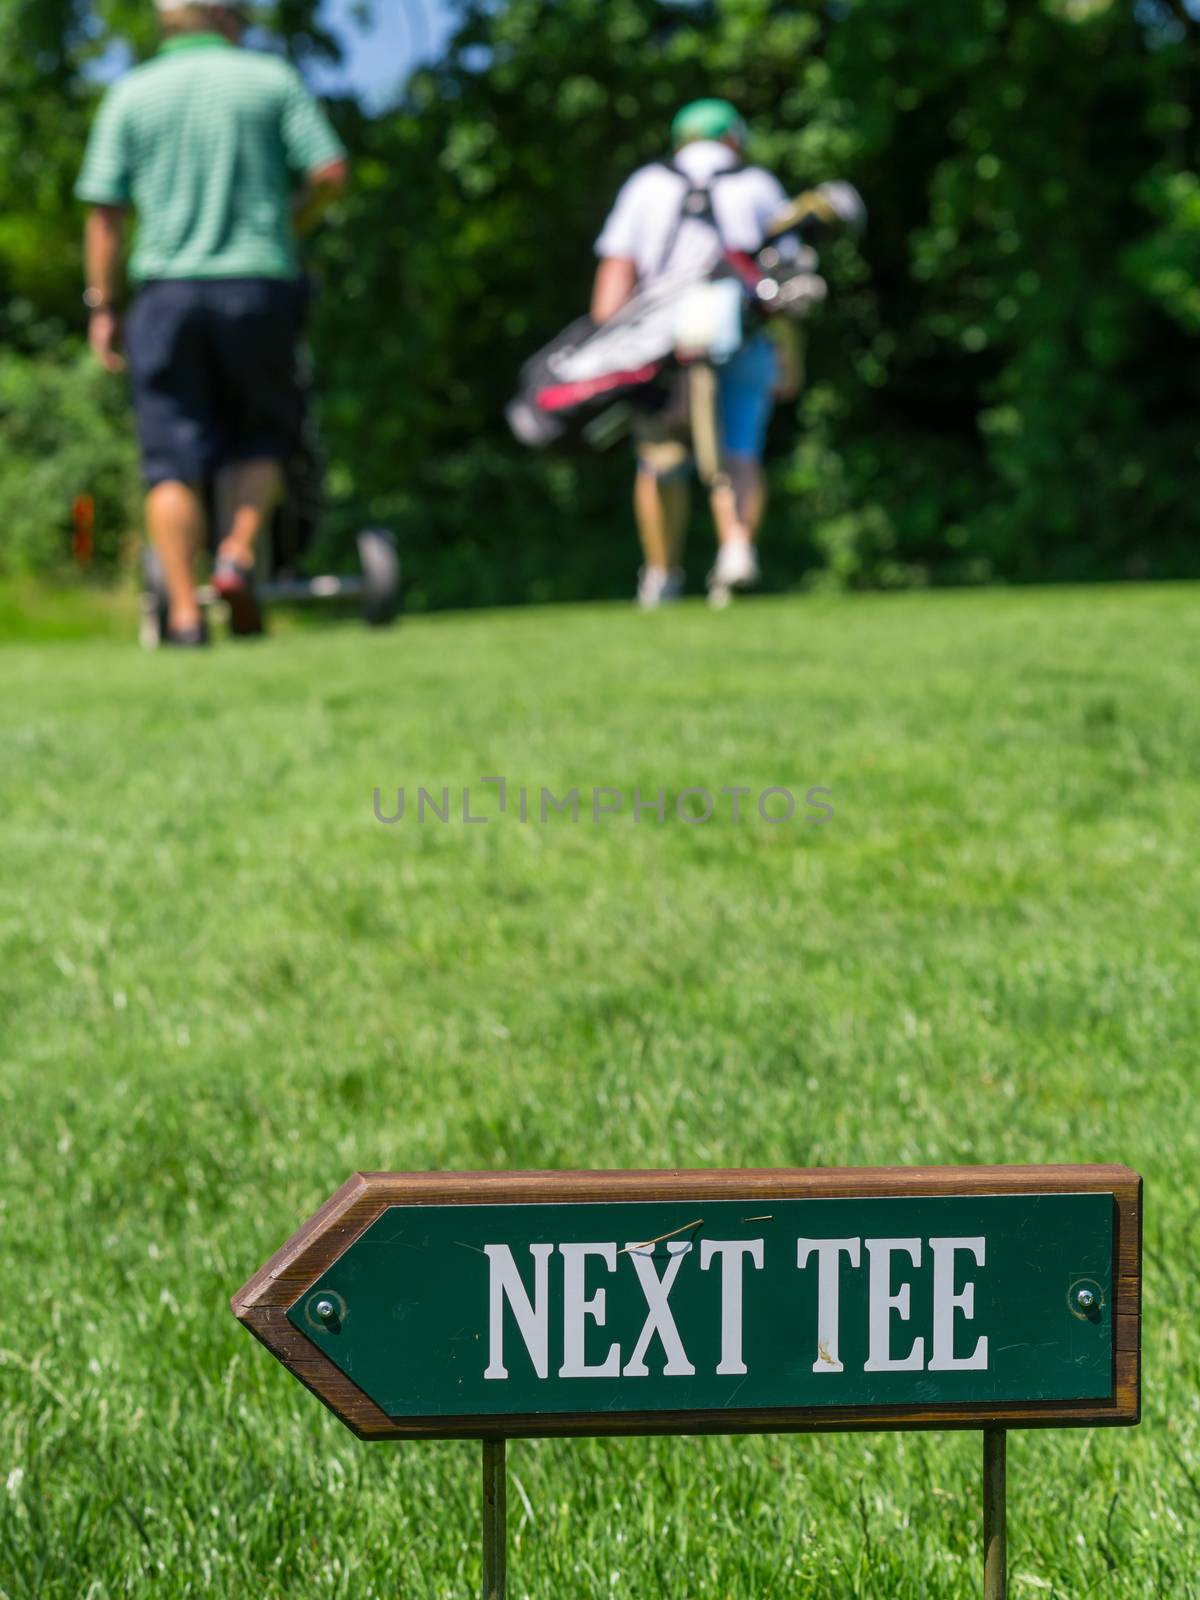 Photo of a Next Tee sign at a golf course with two blurry golfers walking behind.